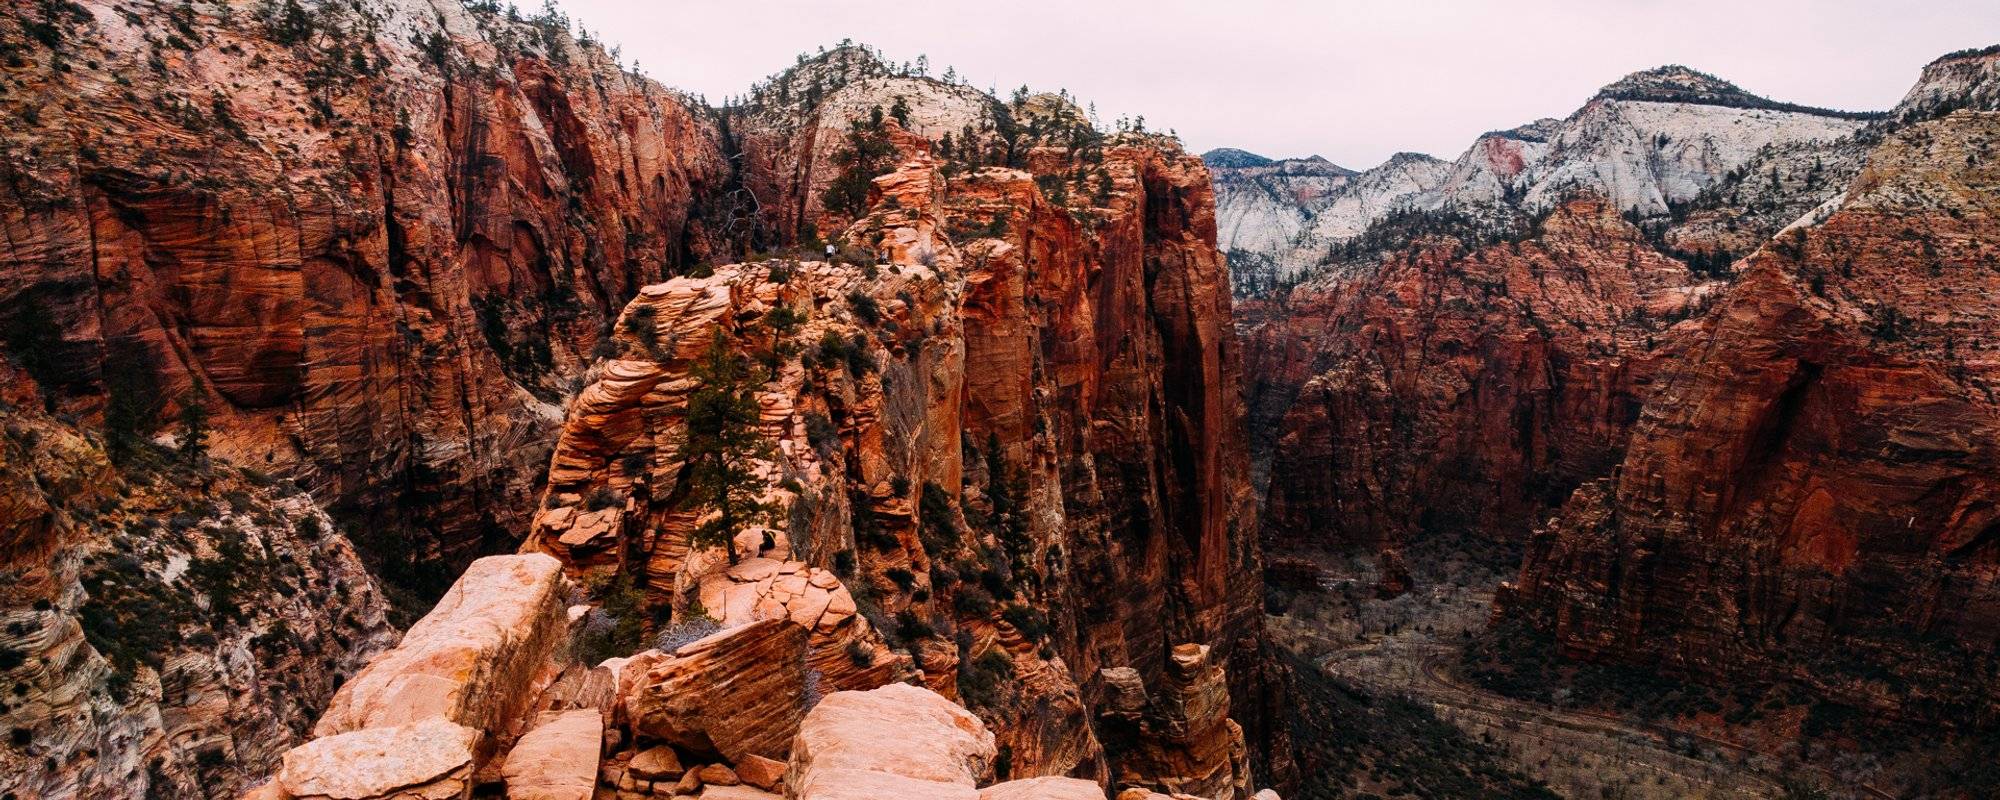 One Step from Death - Hiking Angels Landing (Photos)